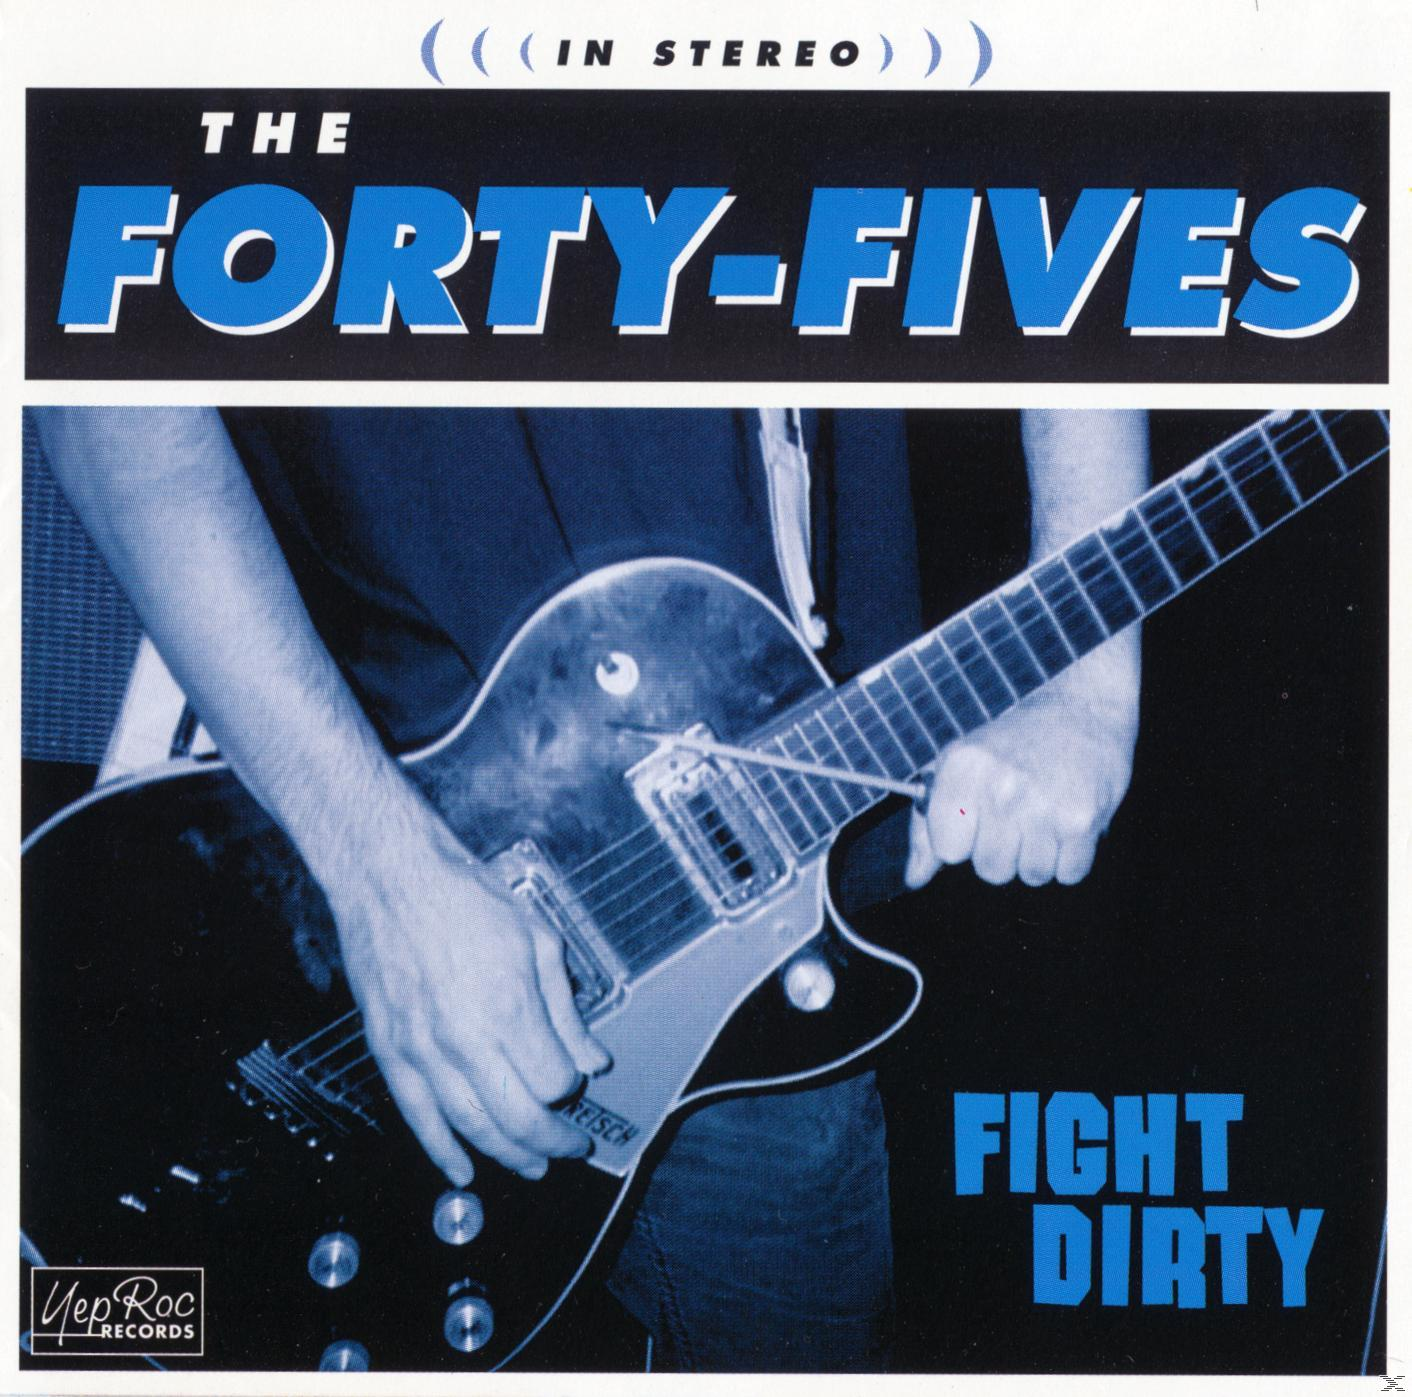 Forty-fives - Fight (CD) - Dirty